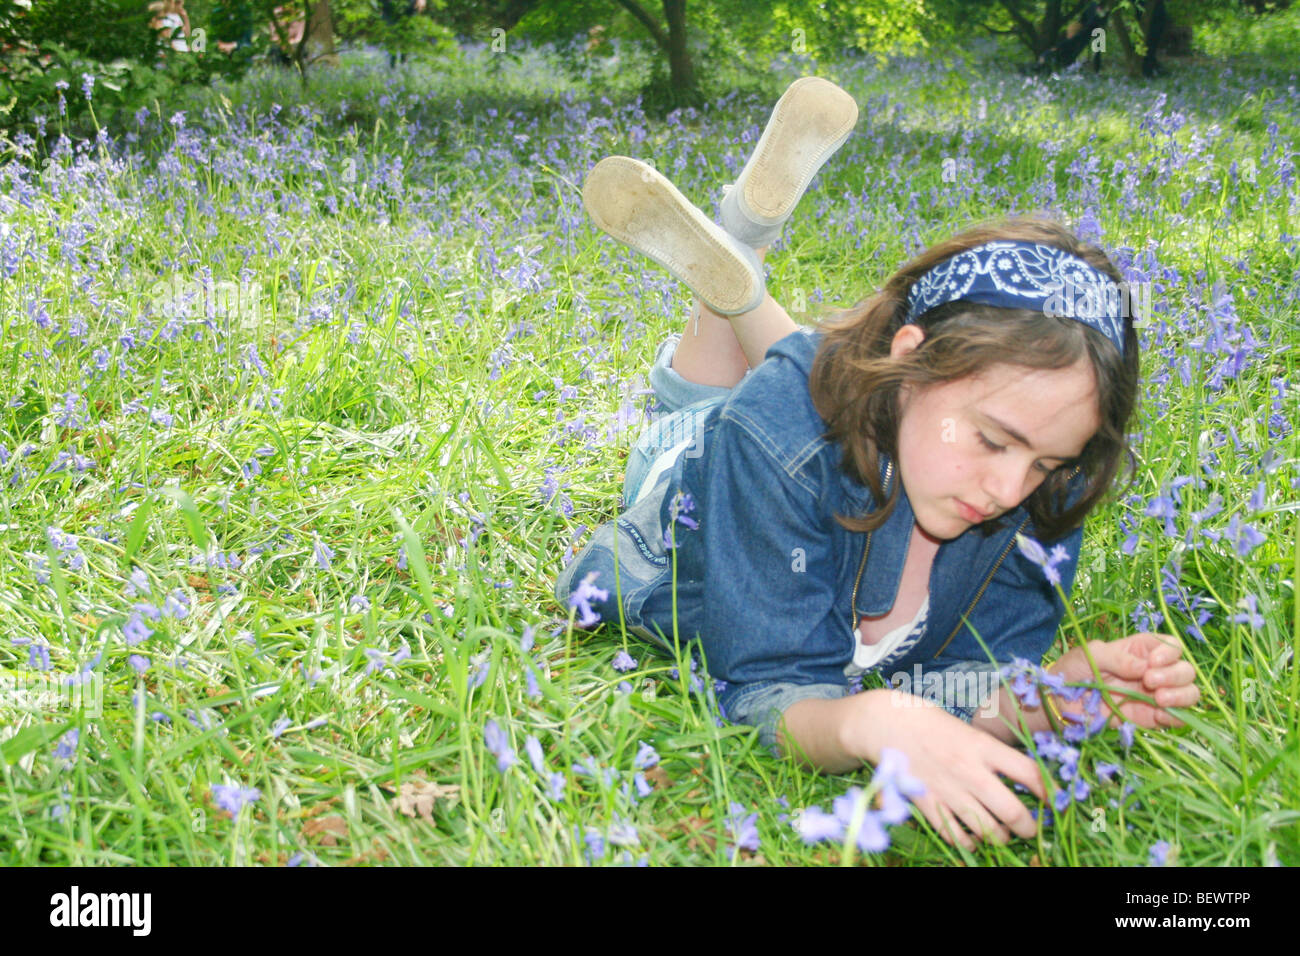 child in field of bluebells lying down alone Stock Photo